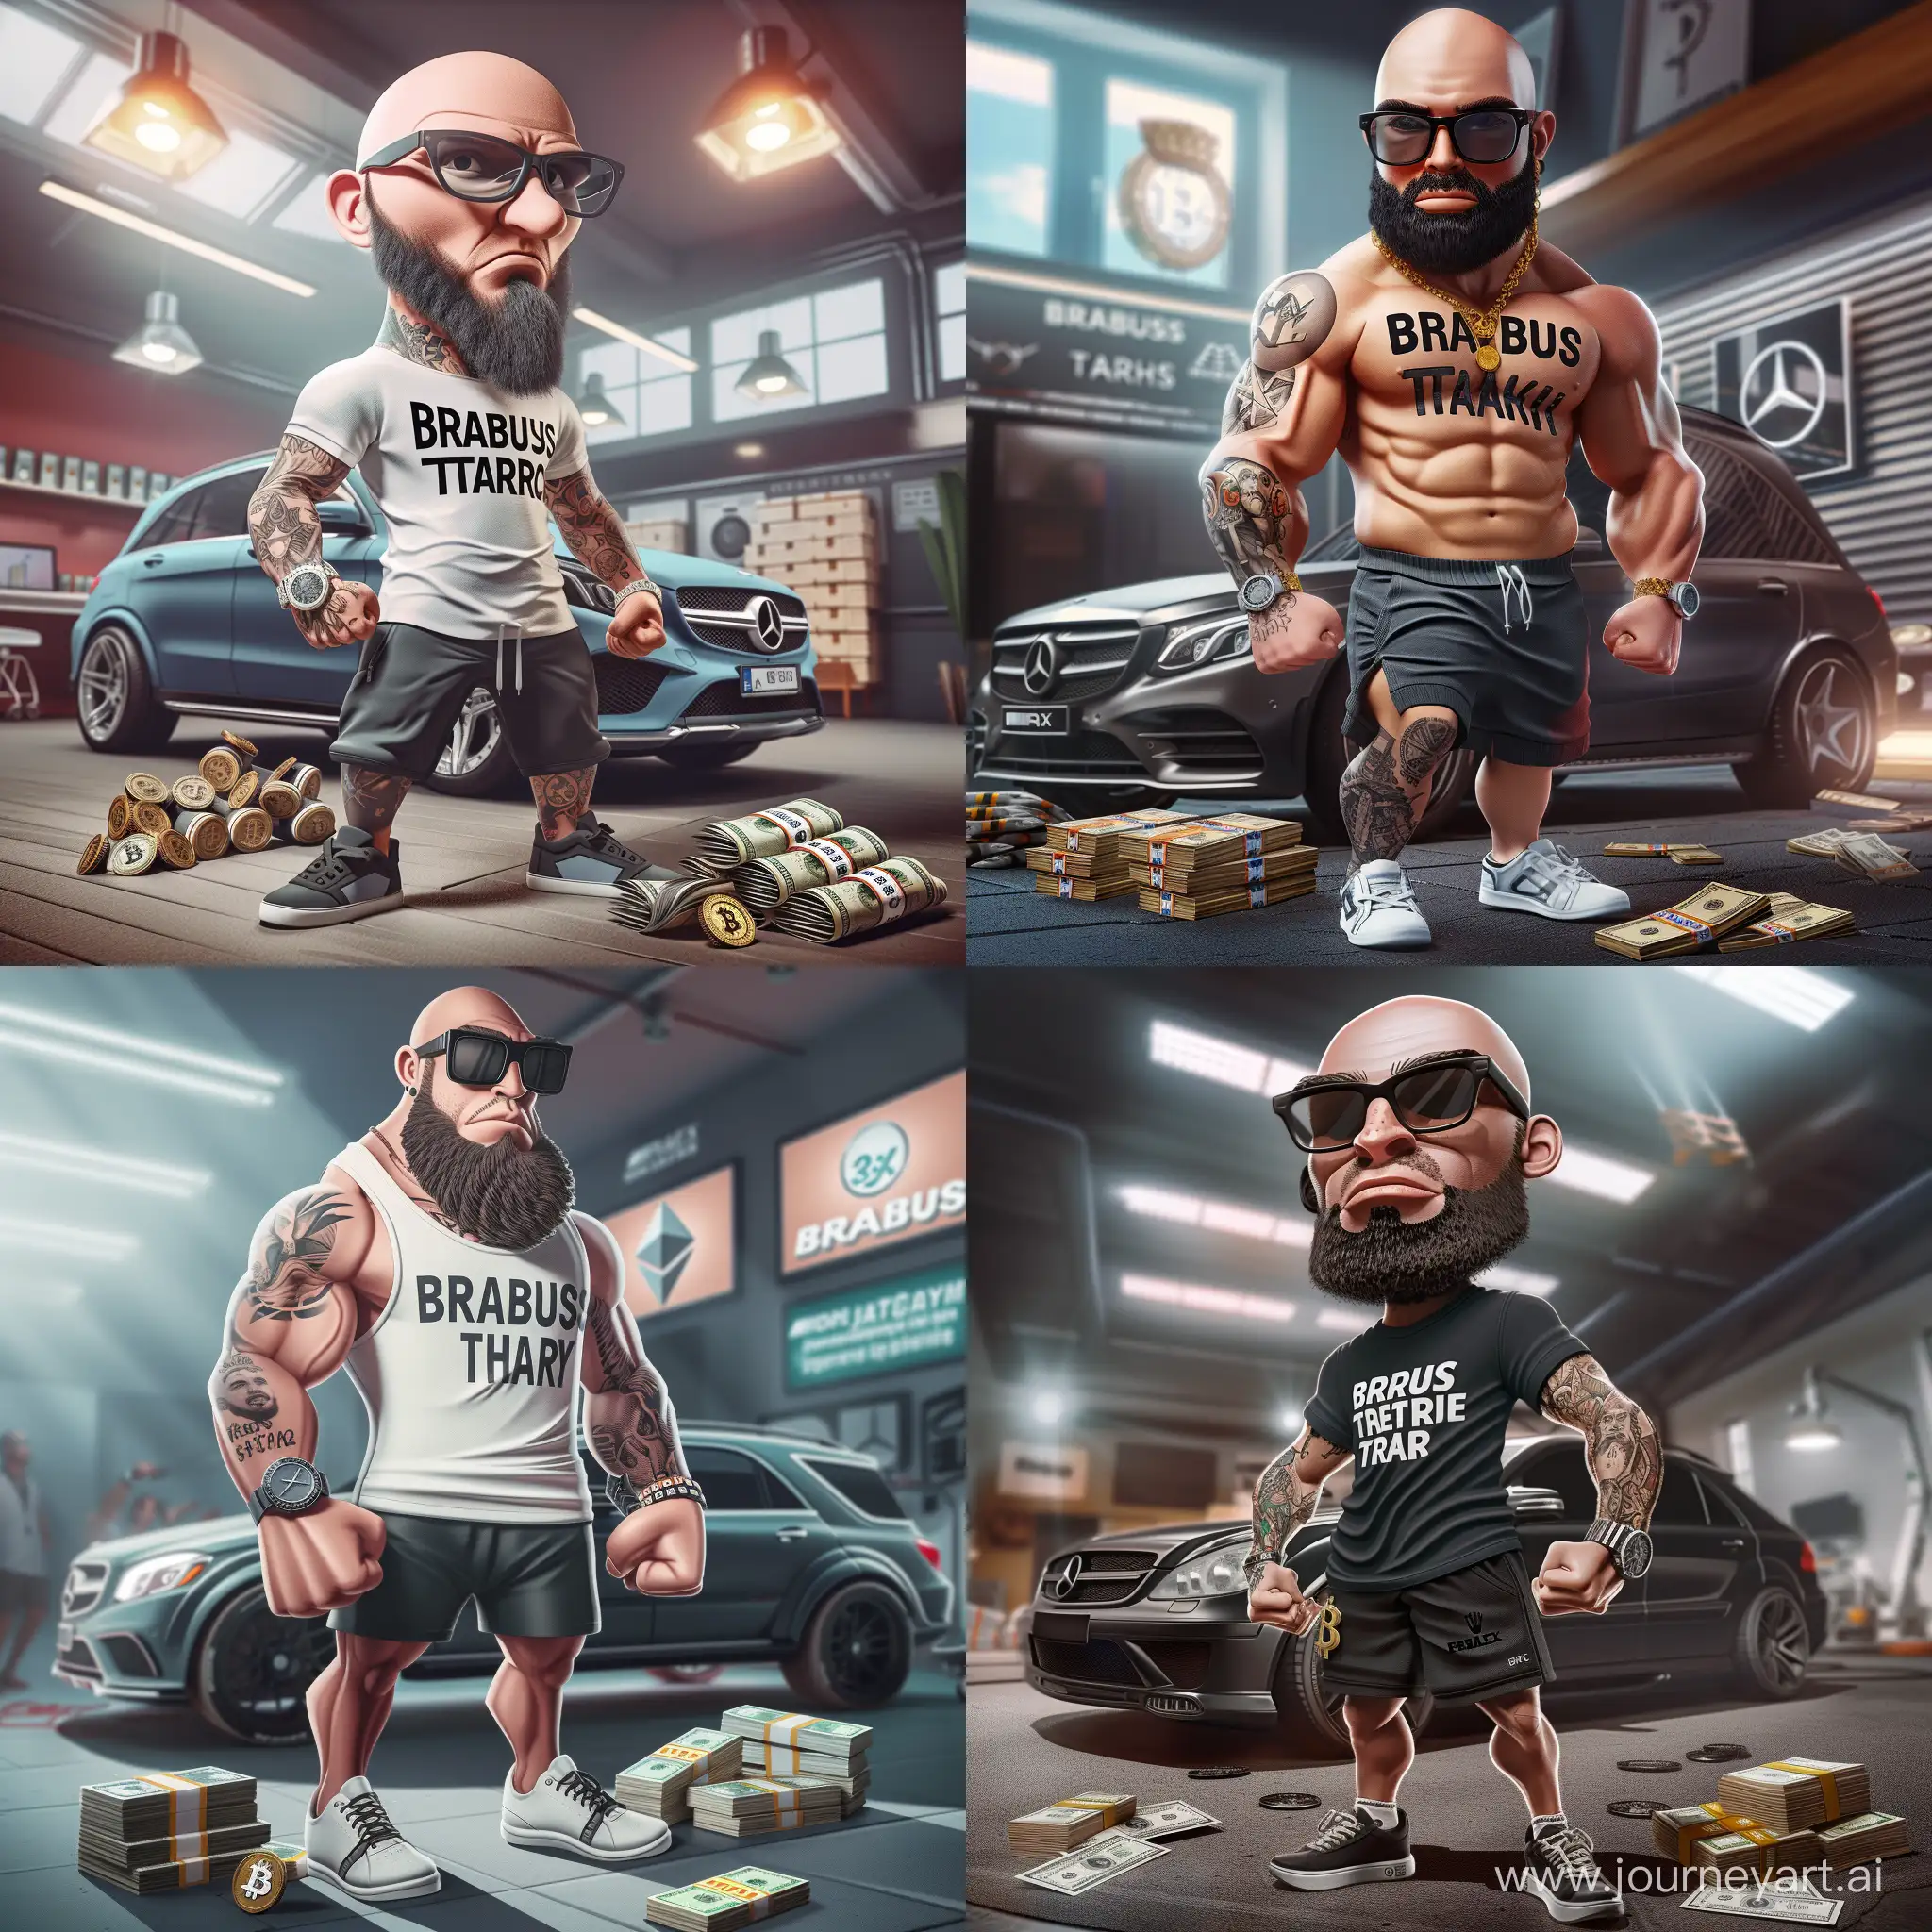 Successful-Wealthy-Man-with-Brabus-SUV-Cryptocurrency-and-Dollars-in-3D-Cartoon-Style